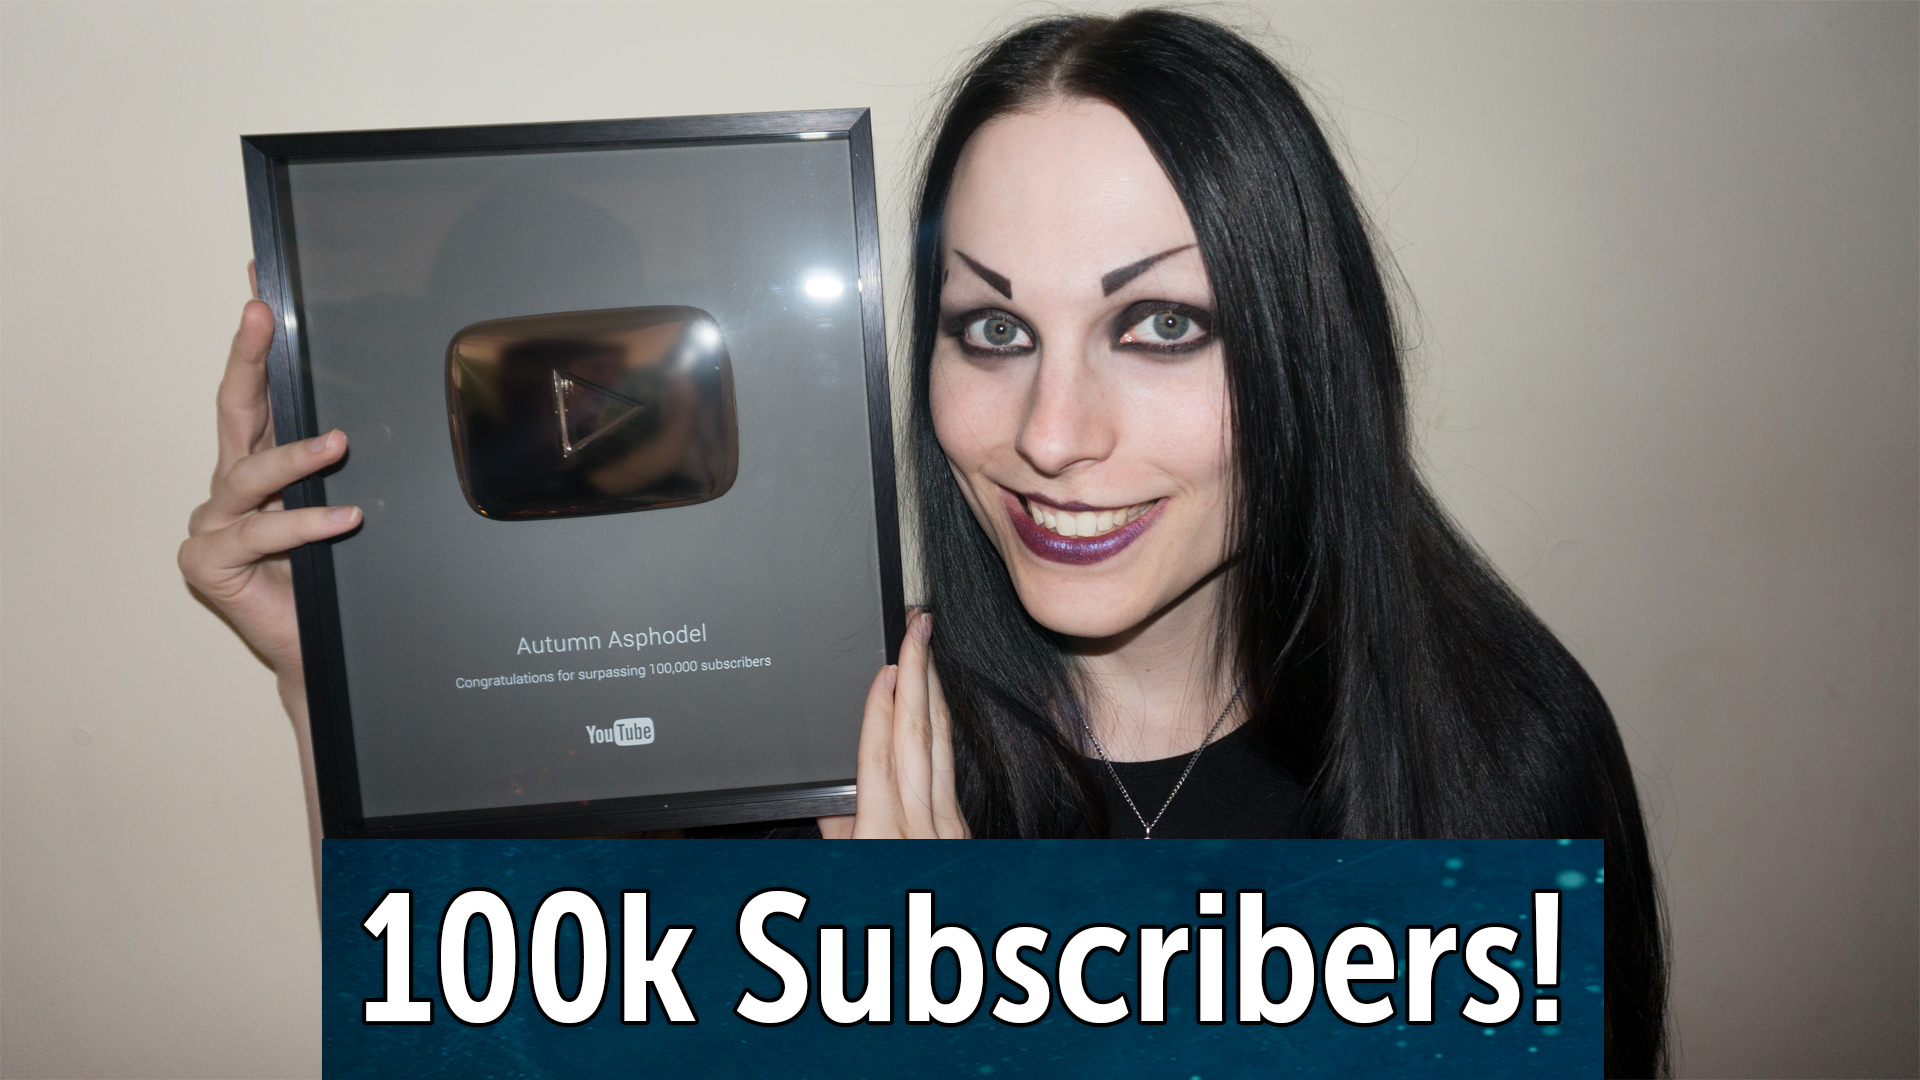 Silver Play Button Unboxing Thank You For 100 000 Subscribers Autumn Asphodel